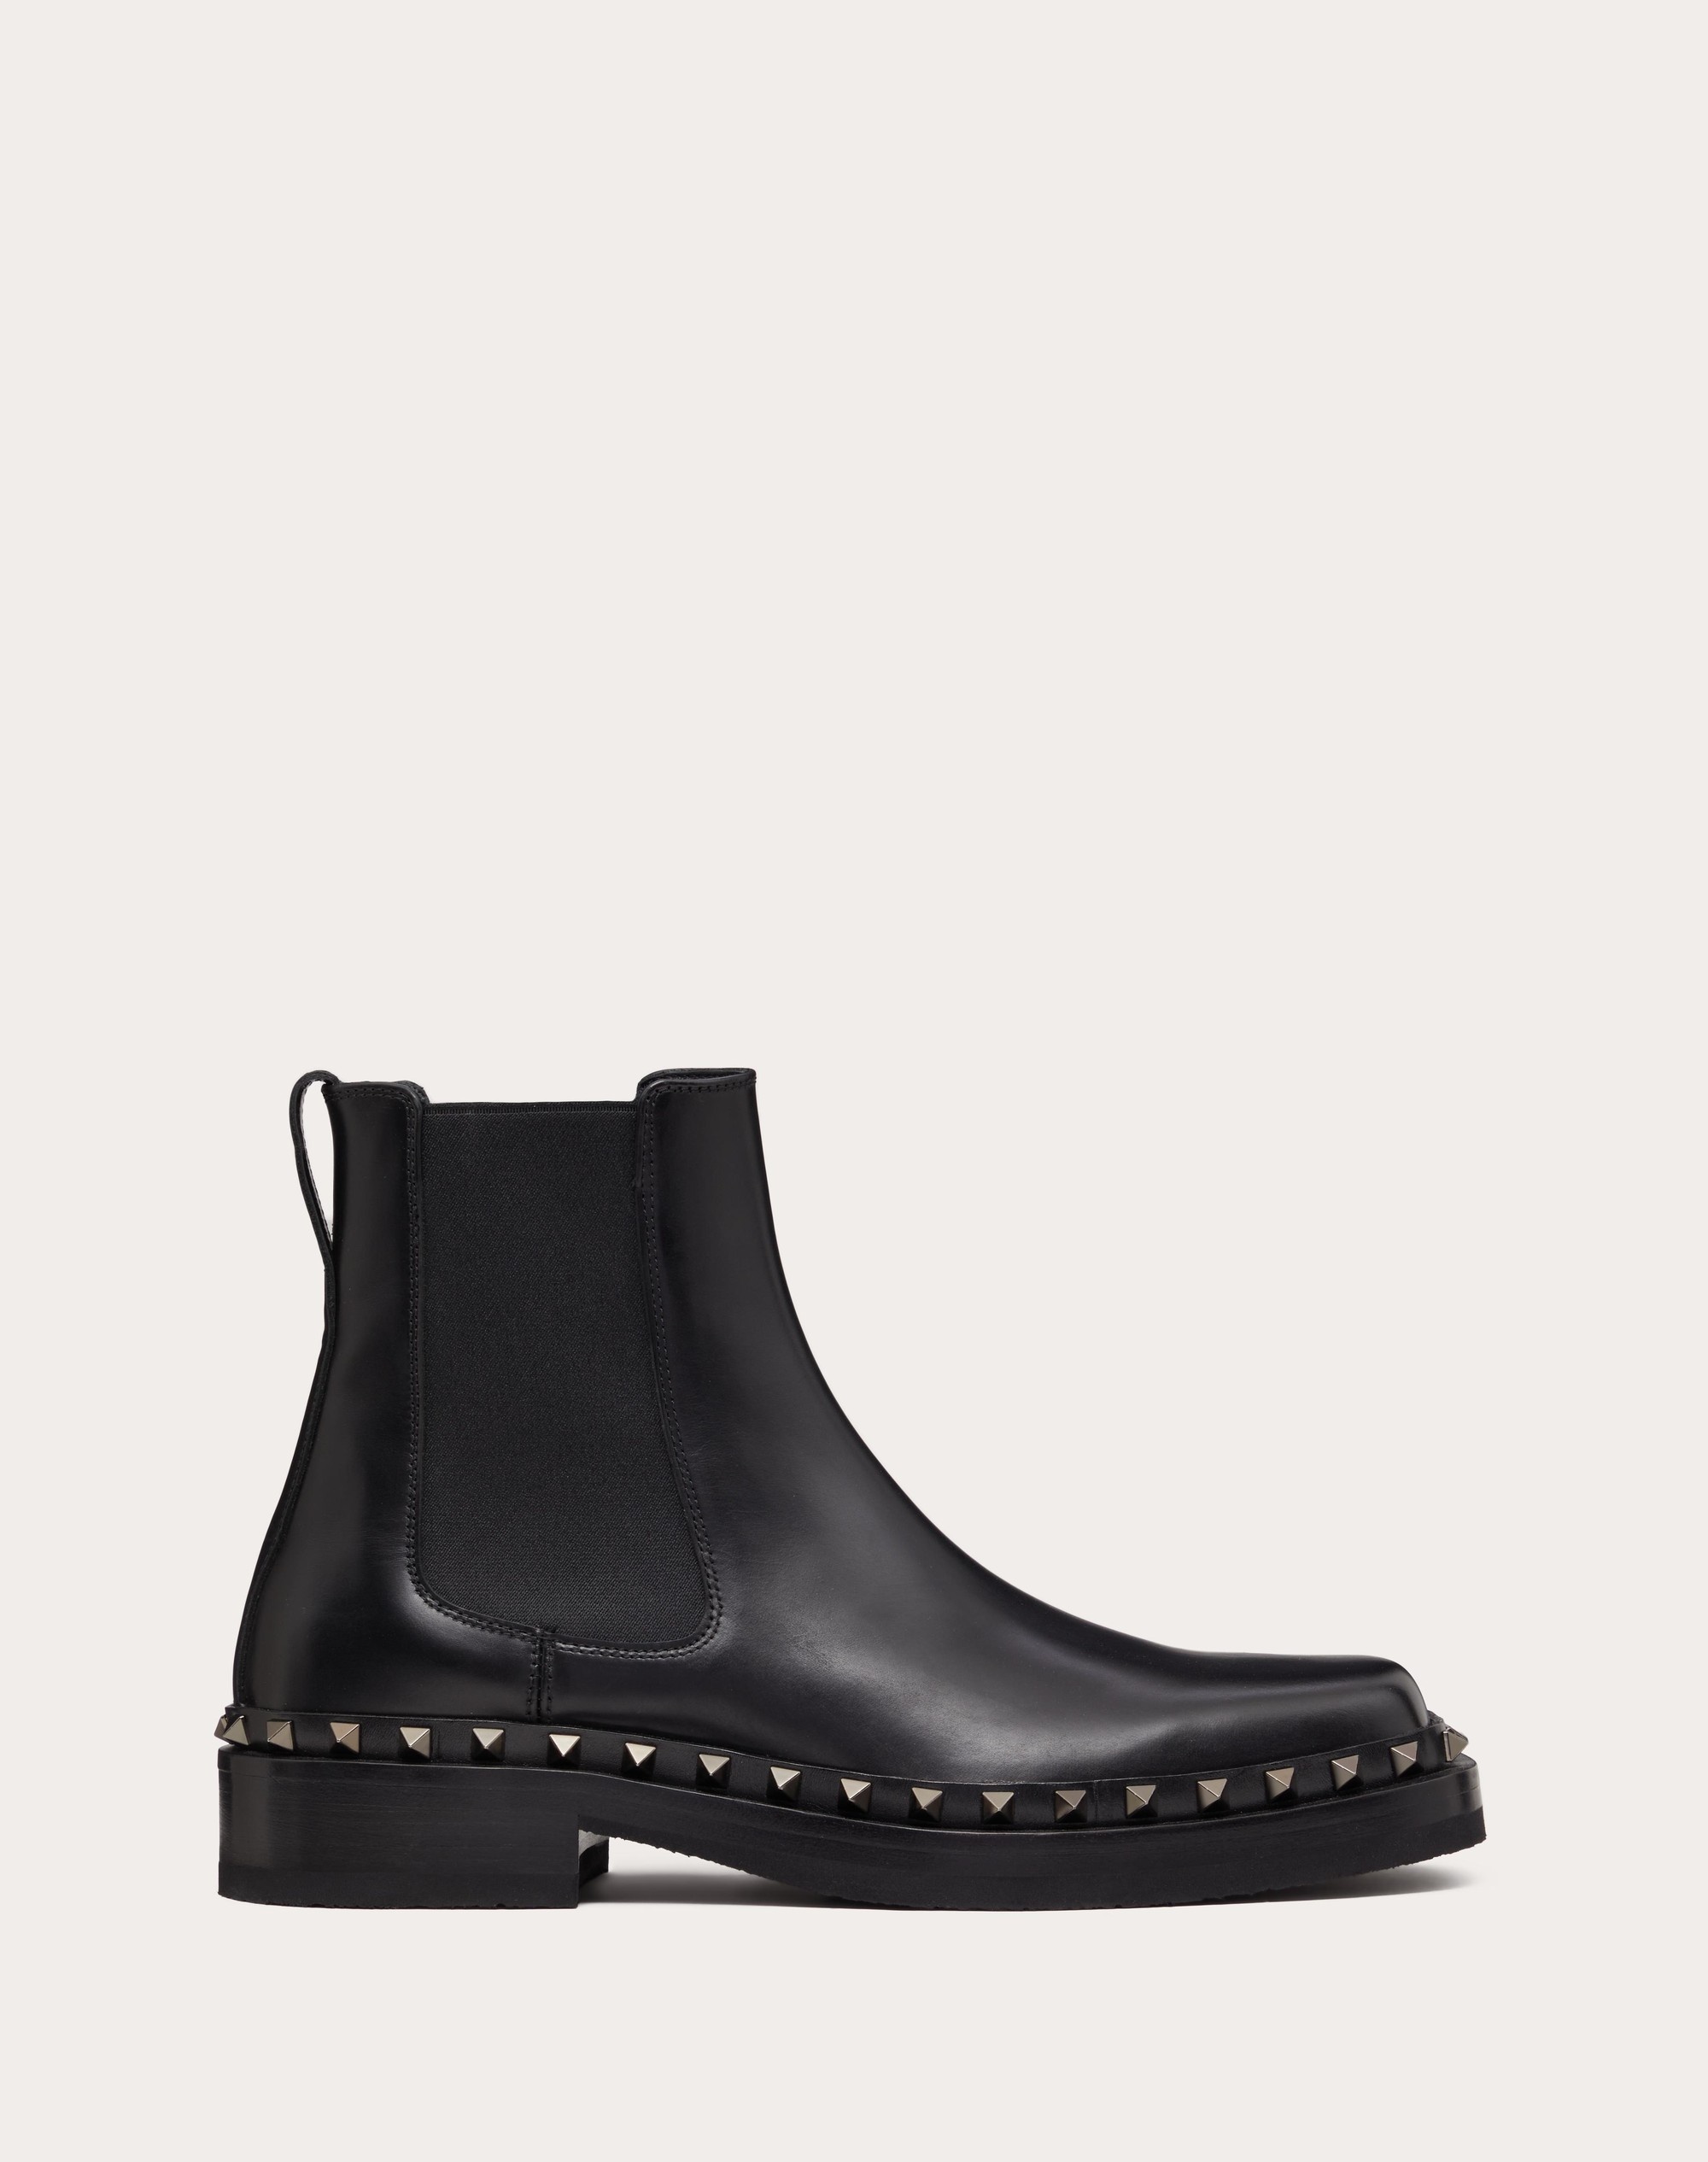 M-WAY ROCKSTUD ANKLE BOOT IN CALFSKIN LEATHER - 1